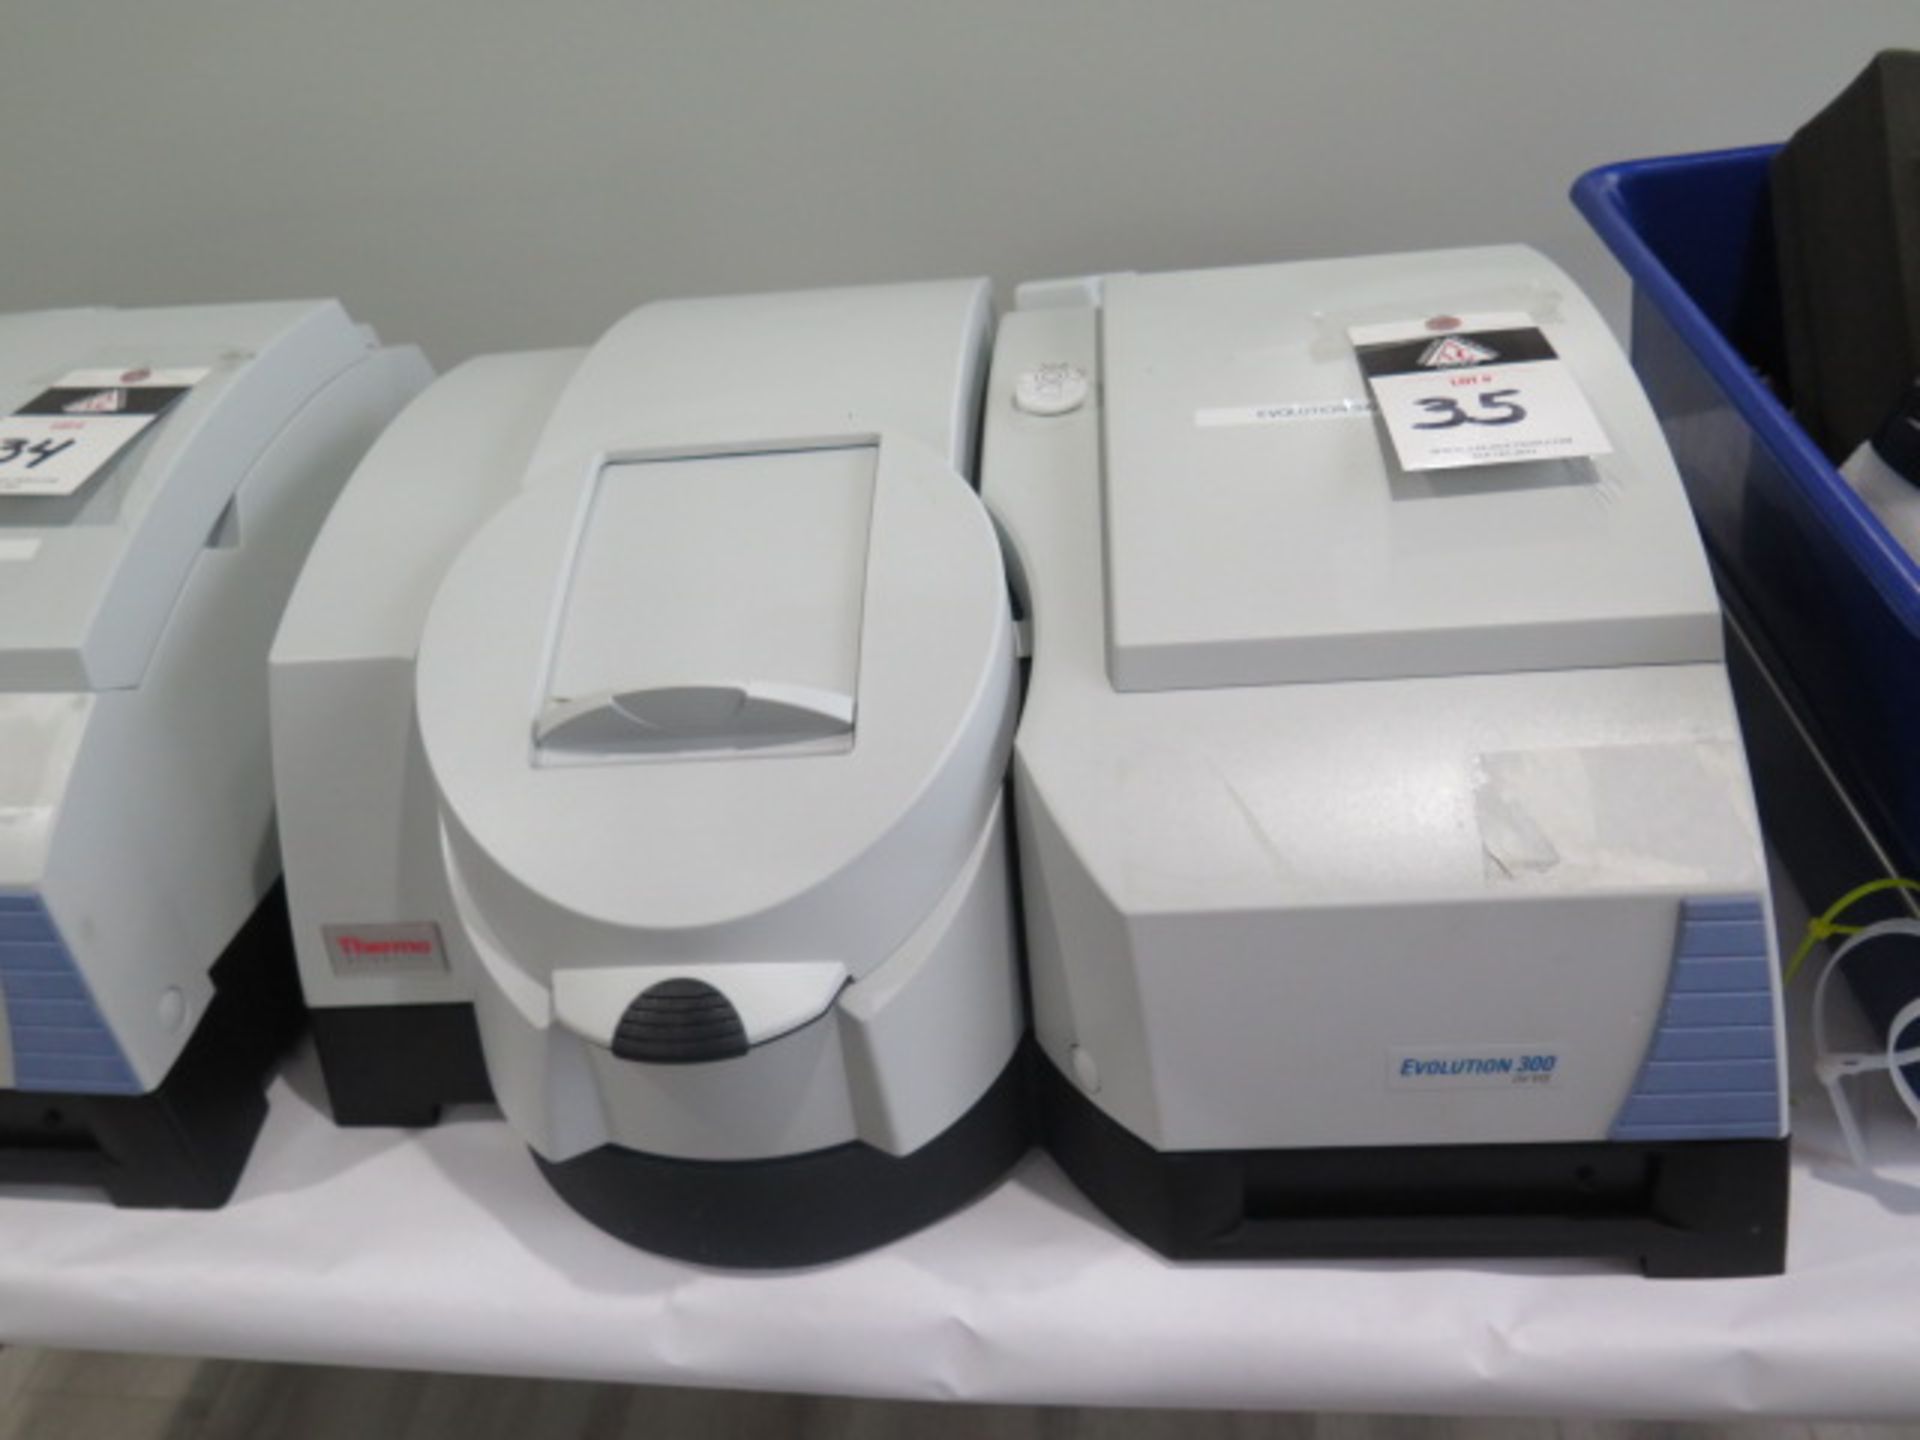 Thermo Scientific Evolution 300 UV-VIS Spectrophotometer s/n EVOU308001 (SOLD AS-IS - NO WARRANTY)